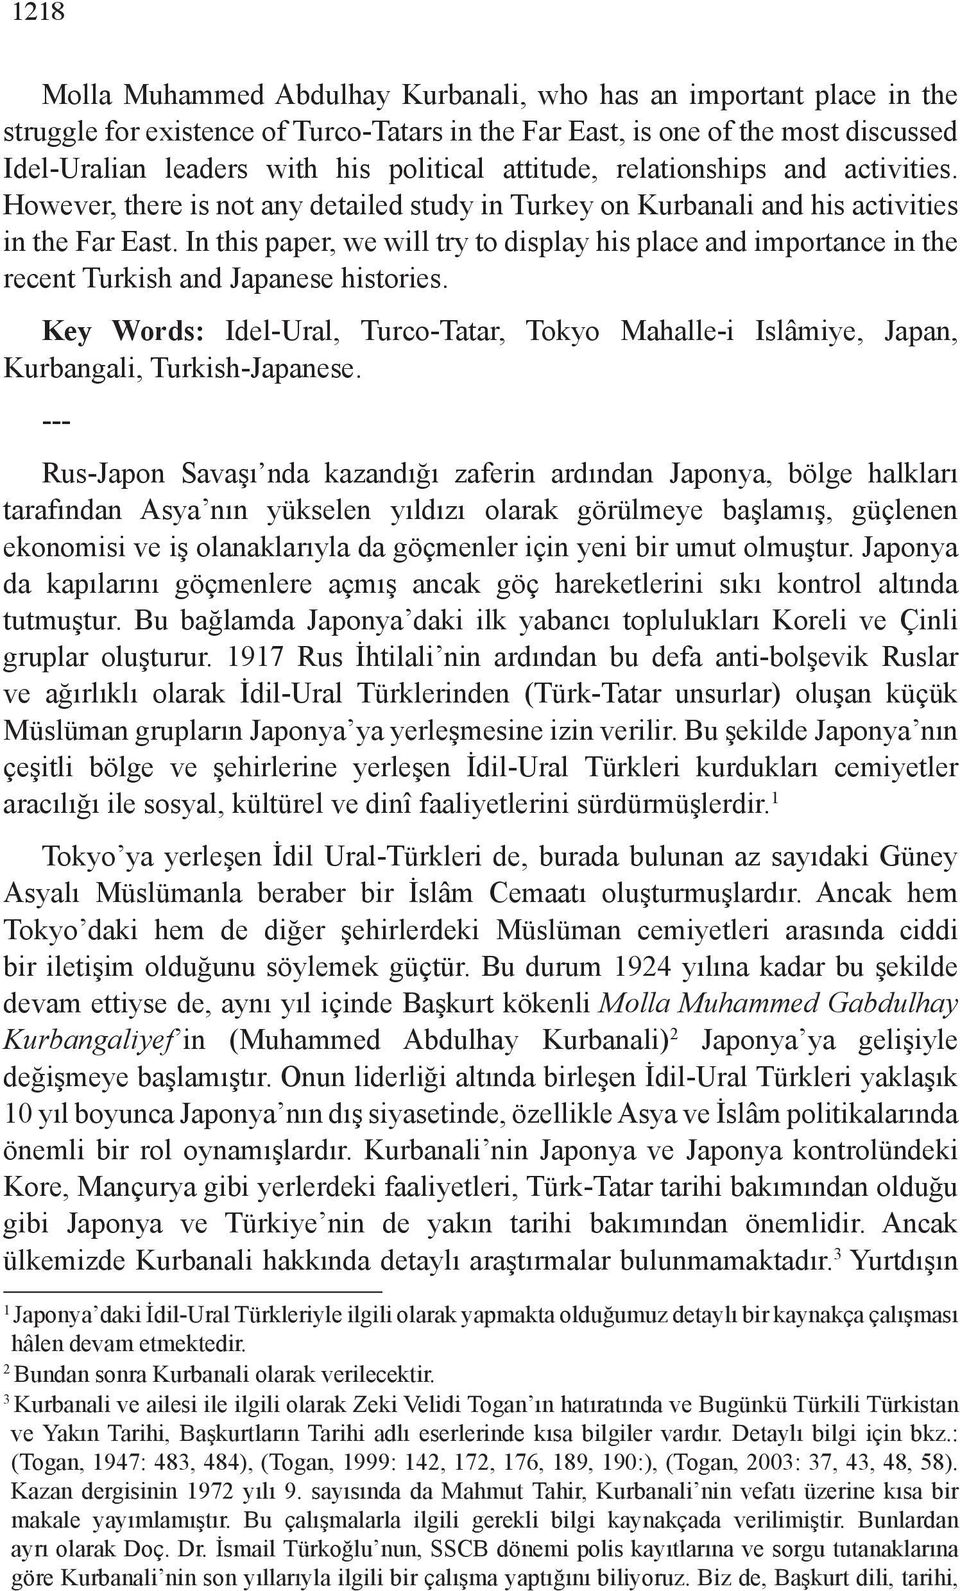 In this paper, we will try to display his place and importance in the recent Turkish and Japanese histories.